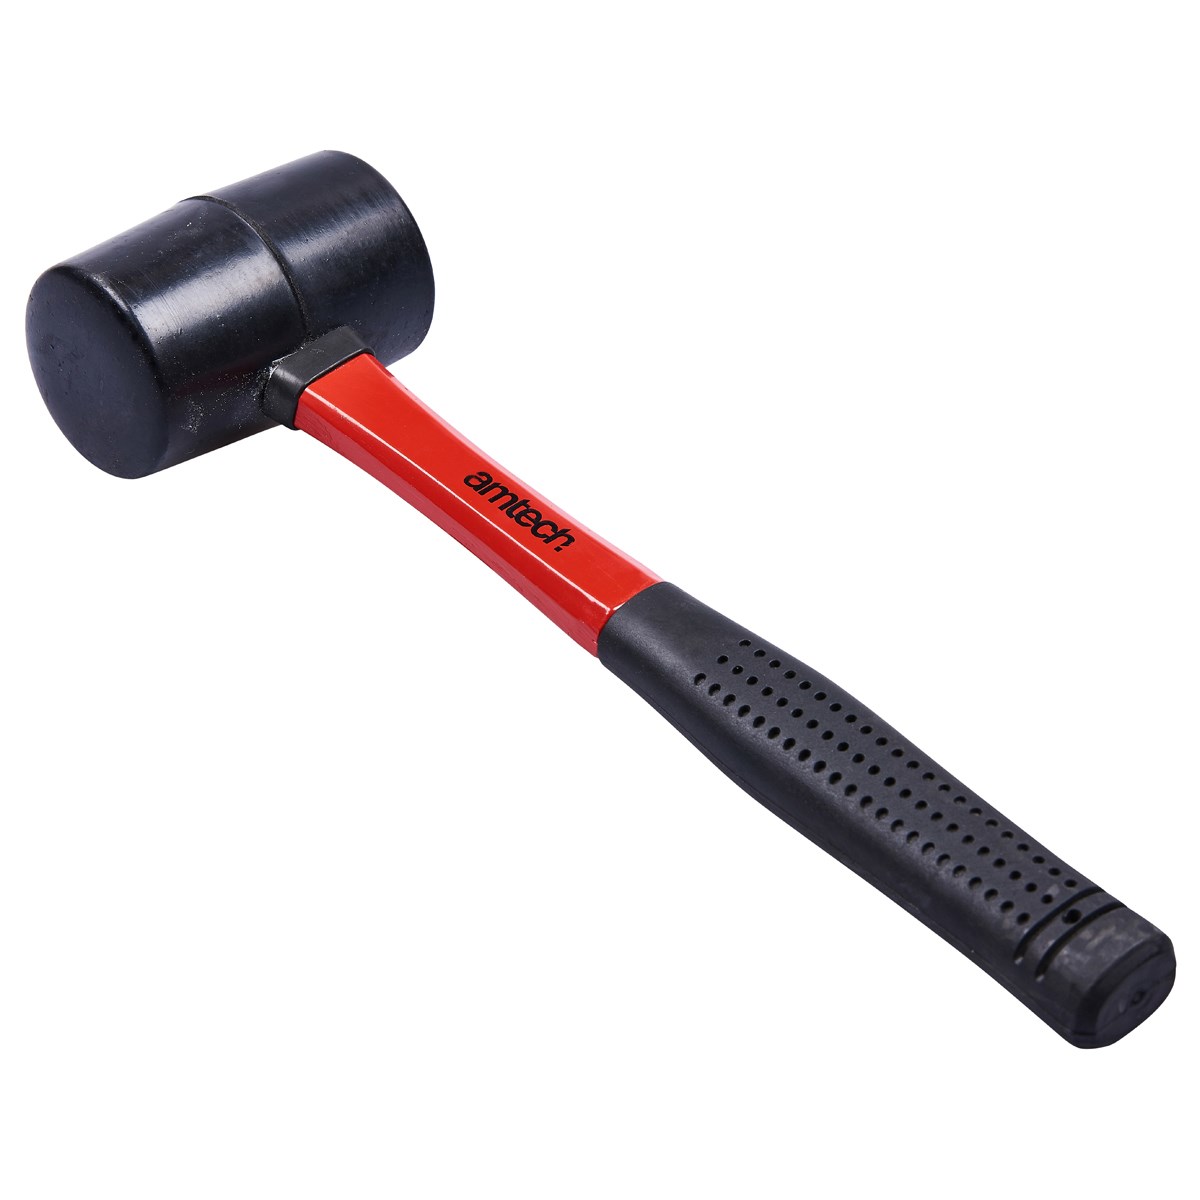 Rubber Mallet, 8oz with a Tubular Metal Handle - Buy Mallets Wholesale - In  Bulk - Cheapest Price